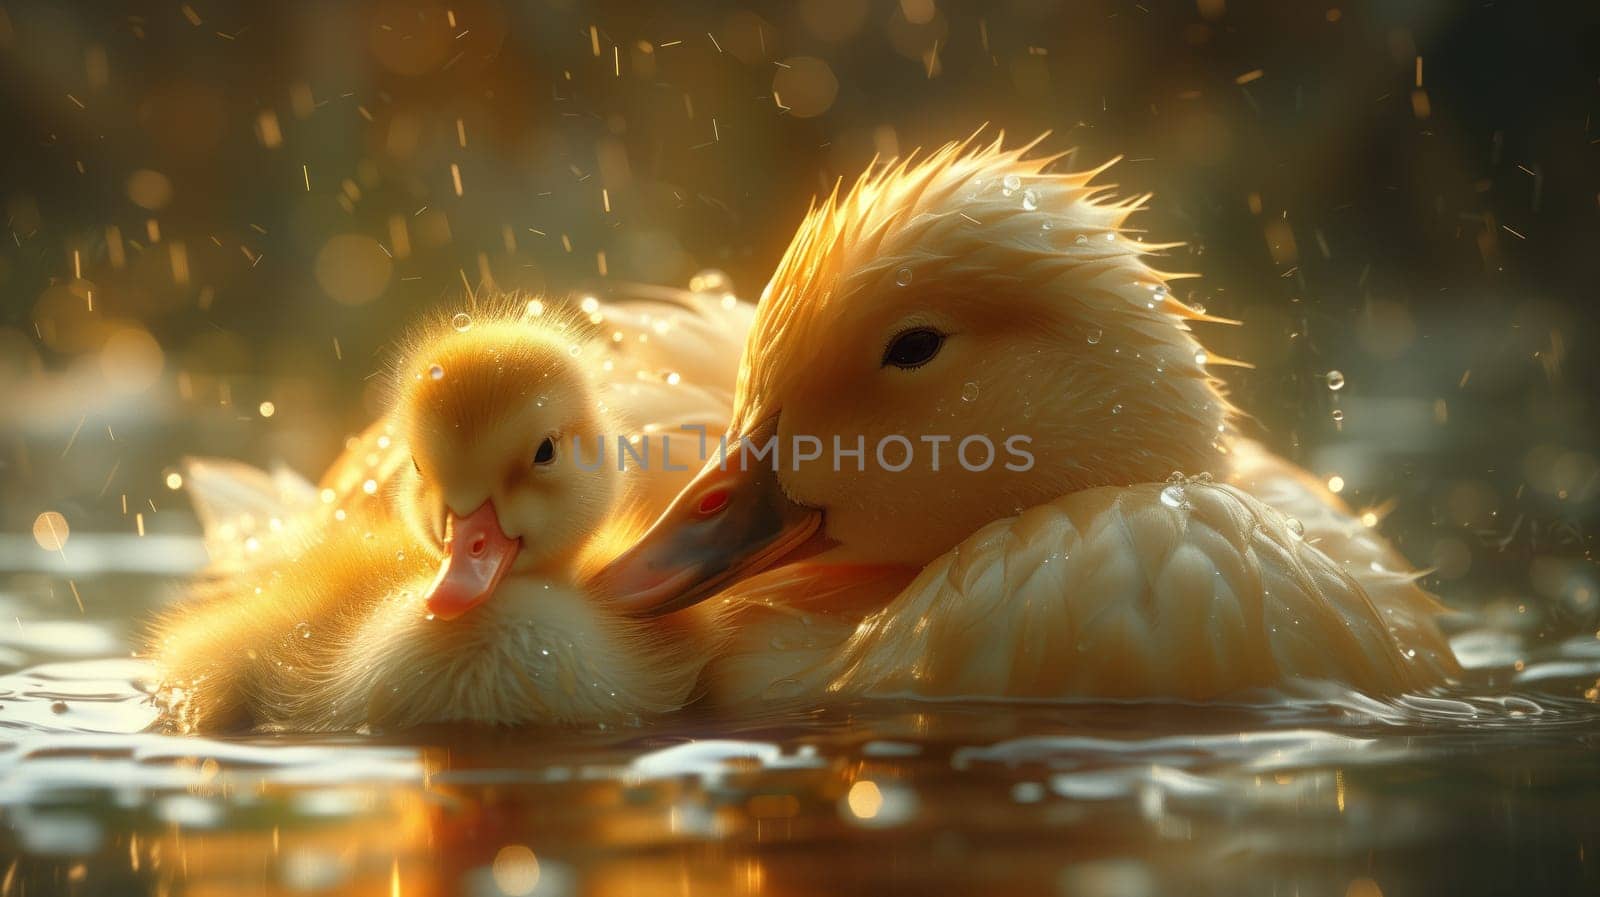 Two ducklings, waterfowl chicks with feathers and beaks, swim together in the liquid. They are a type of water bird, part of the duck family